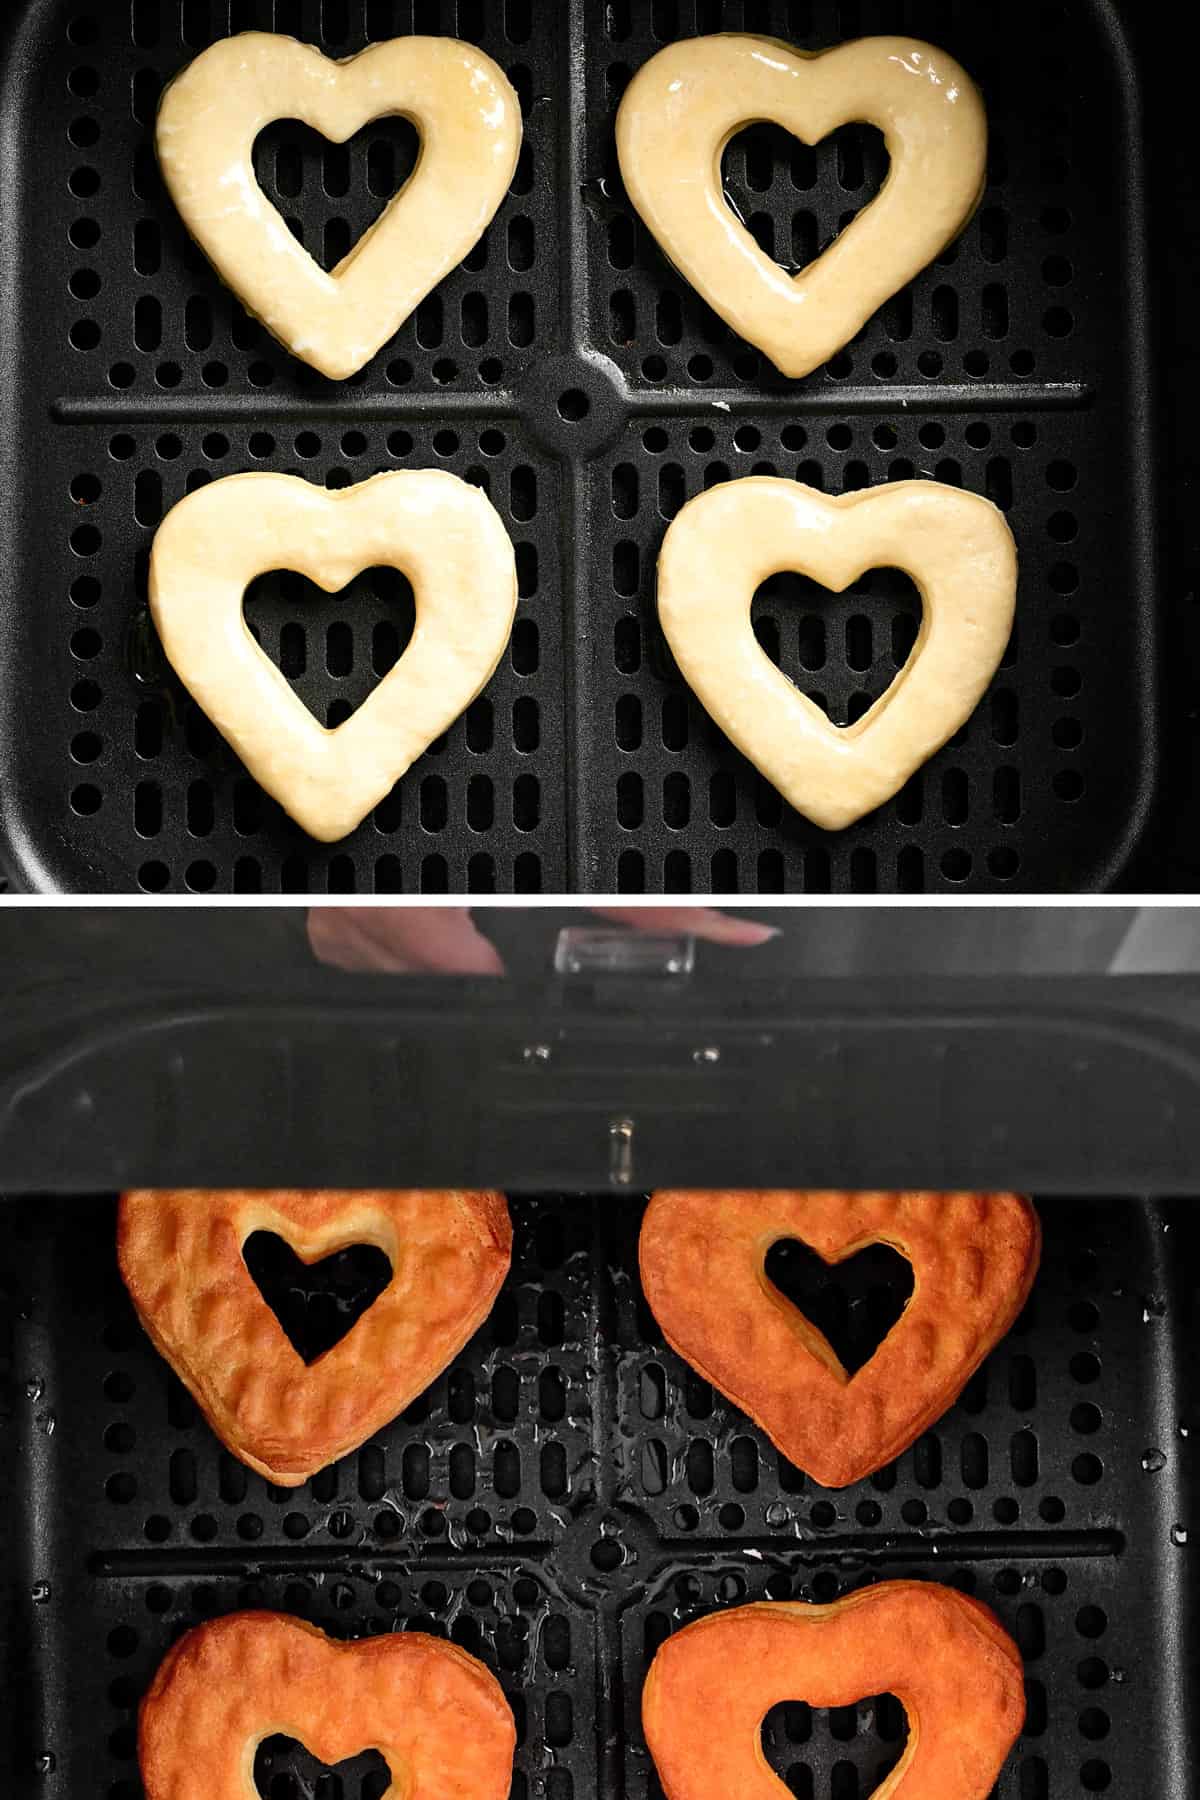 heart shaped donuts in an air fryer.